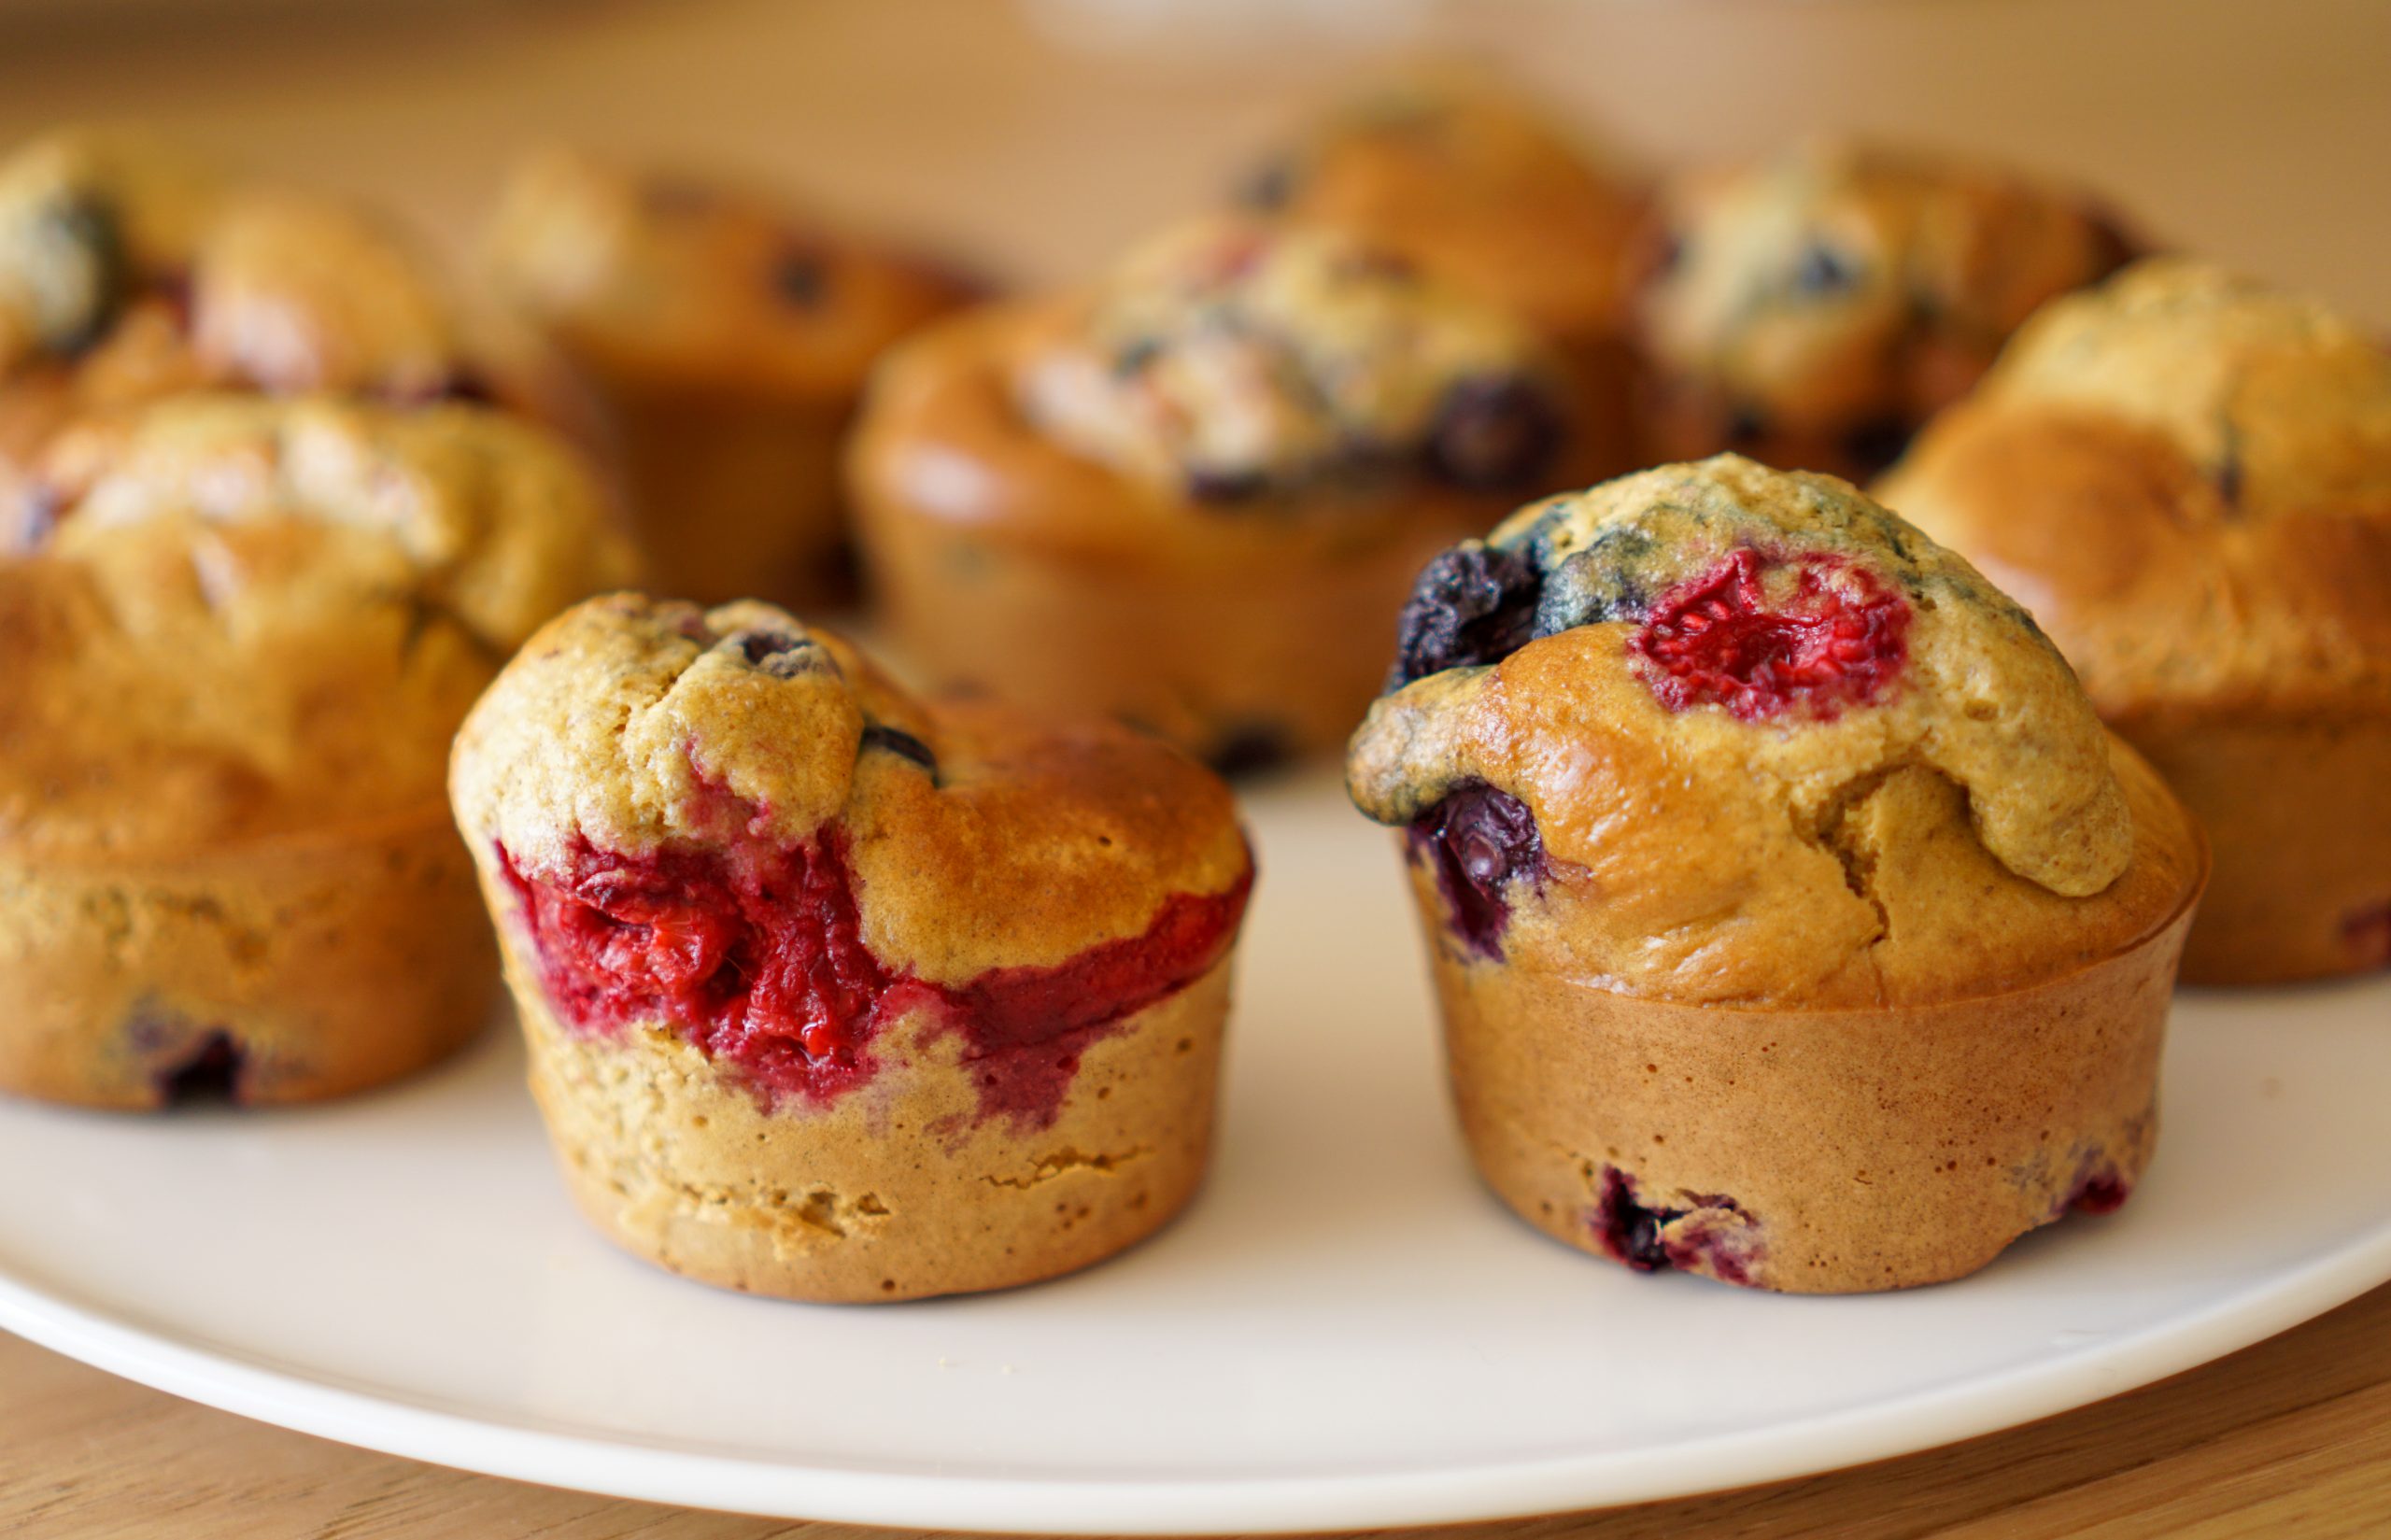 Muffins healthy aux fruits rouges